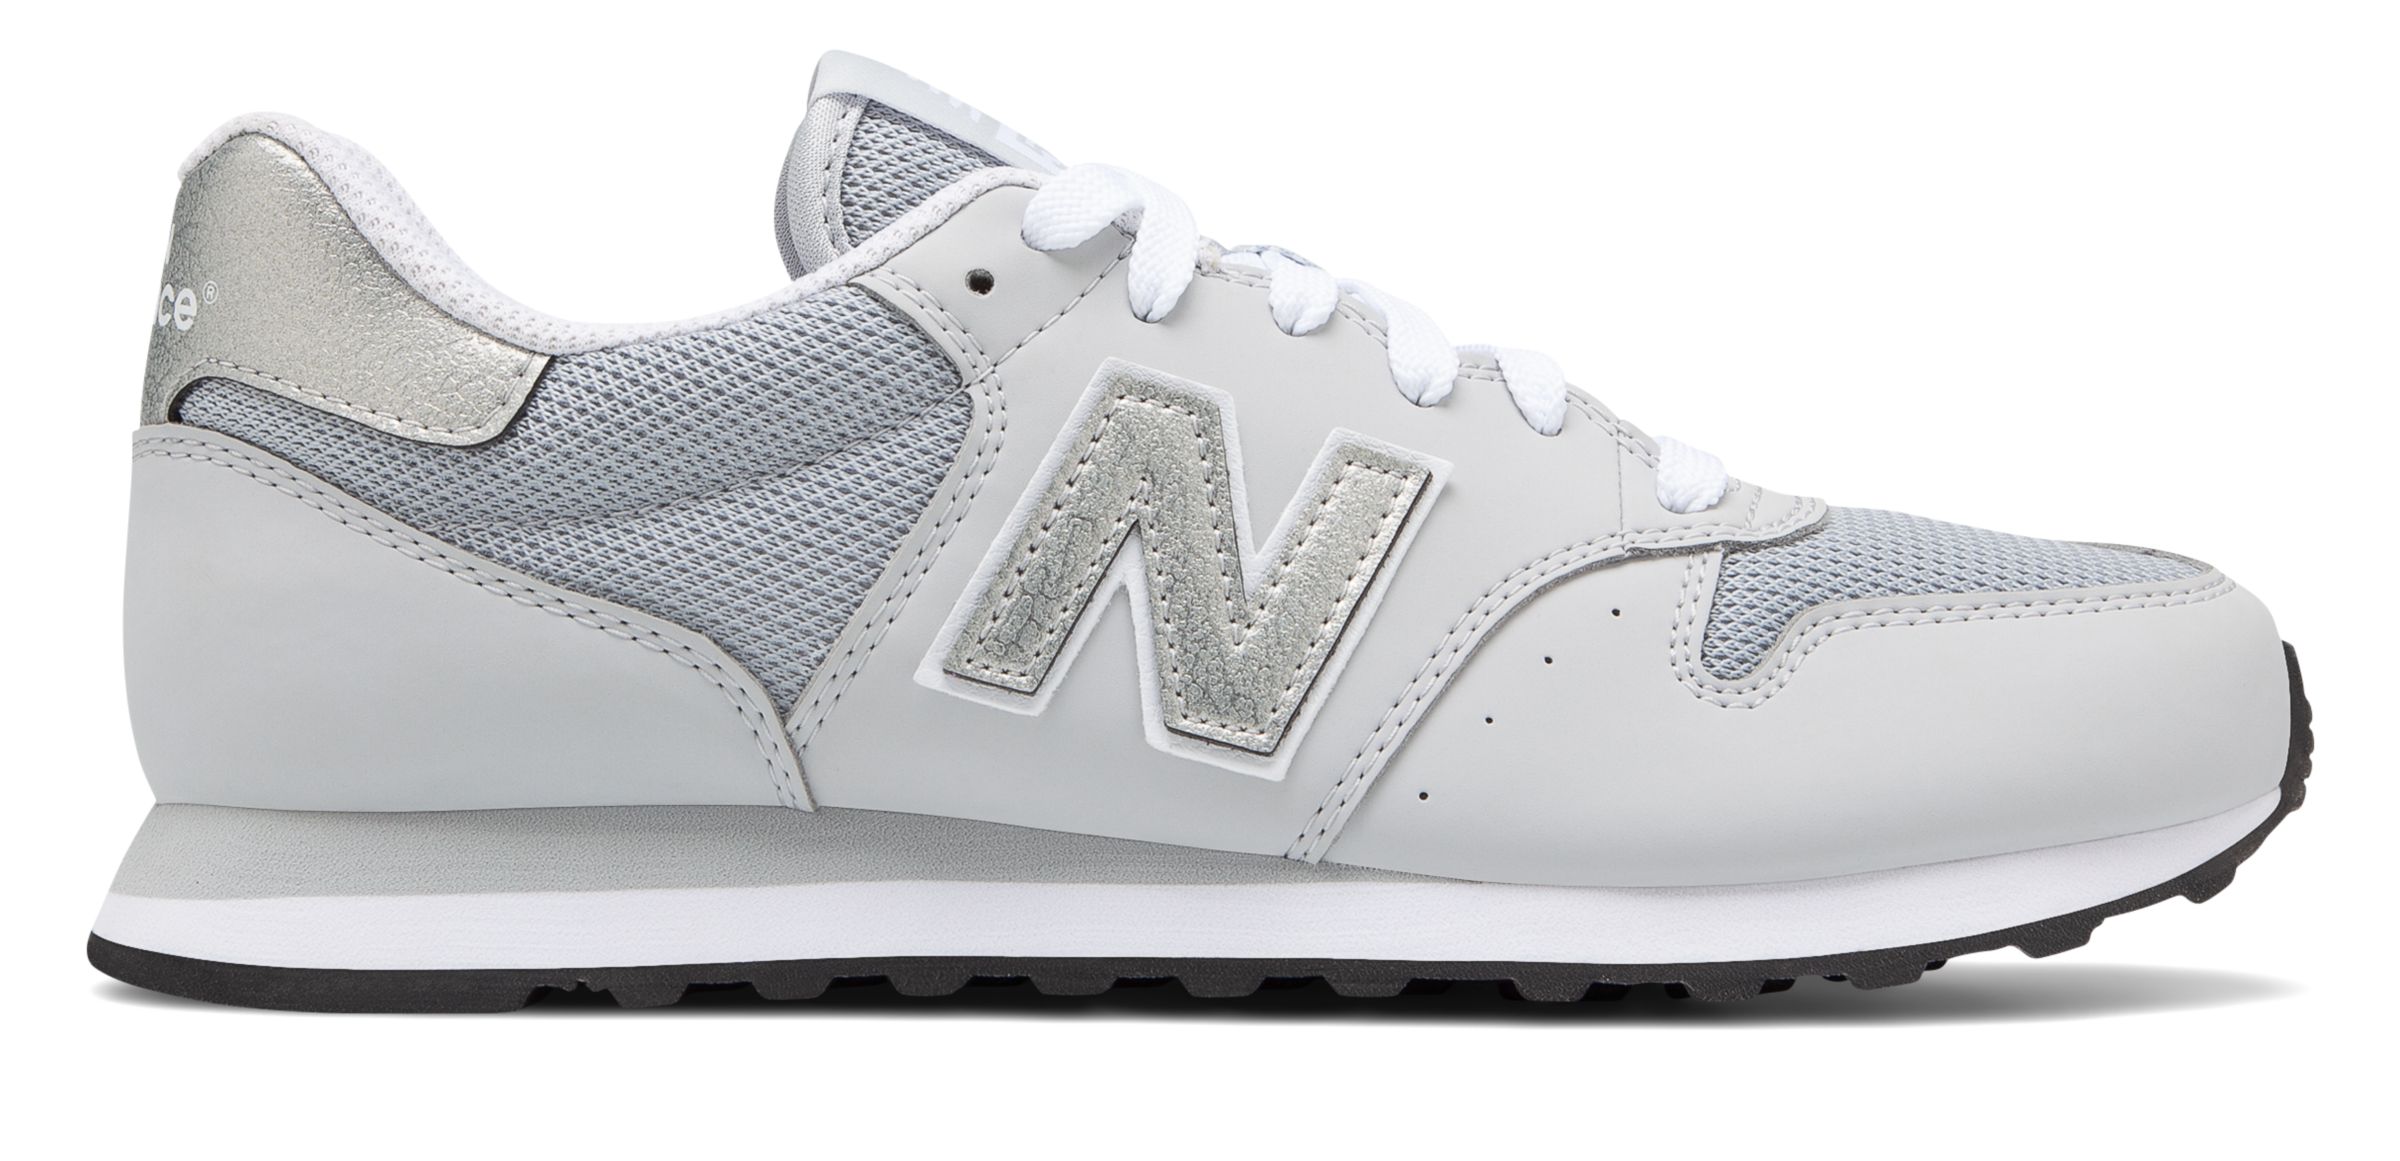 Classics Women's Shoes & Lifestyle Sneakers | New Balance